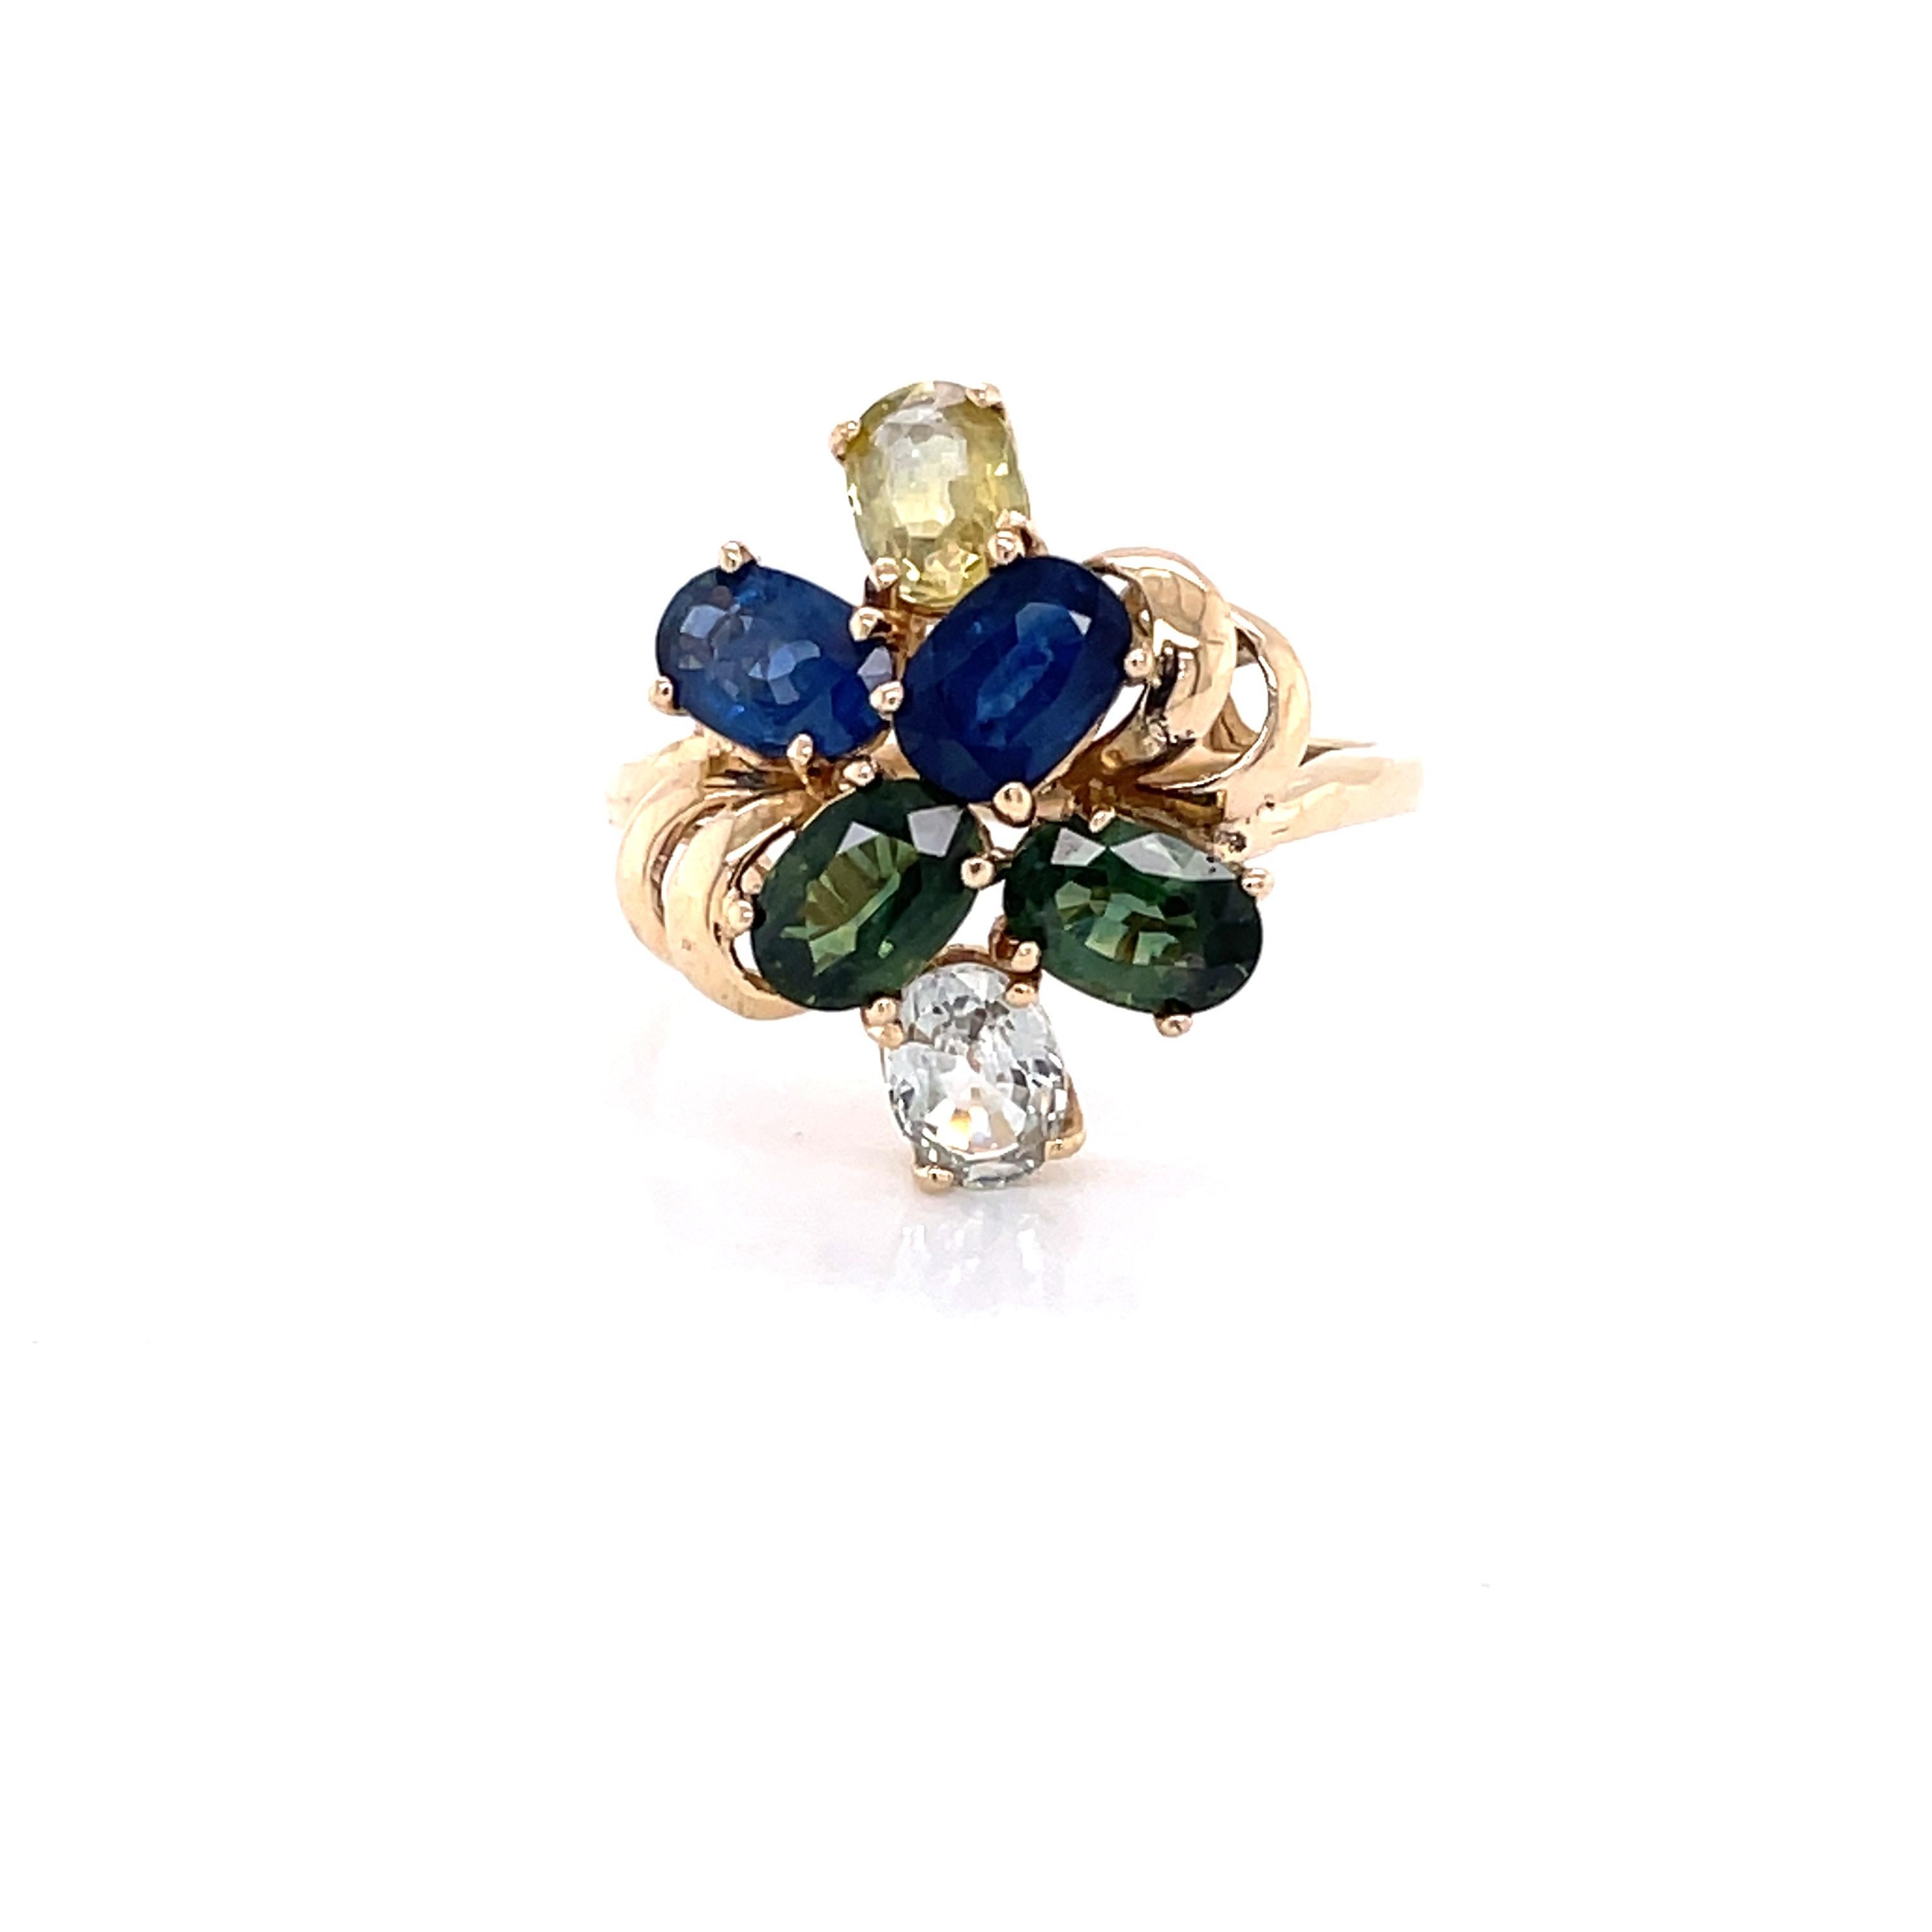 A colorful asymmetrical arrangement of green peridot, blue topaz, blue sapphire, yellow citrine and white zircon creates this pleasing cluster ring, circa 1950. Crafted in 14 karat yellow gold with a raised gallery, the head of this cheerful ring,